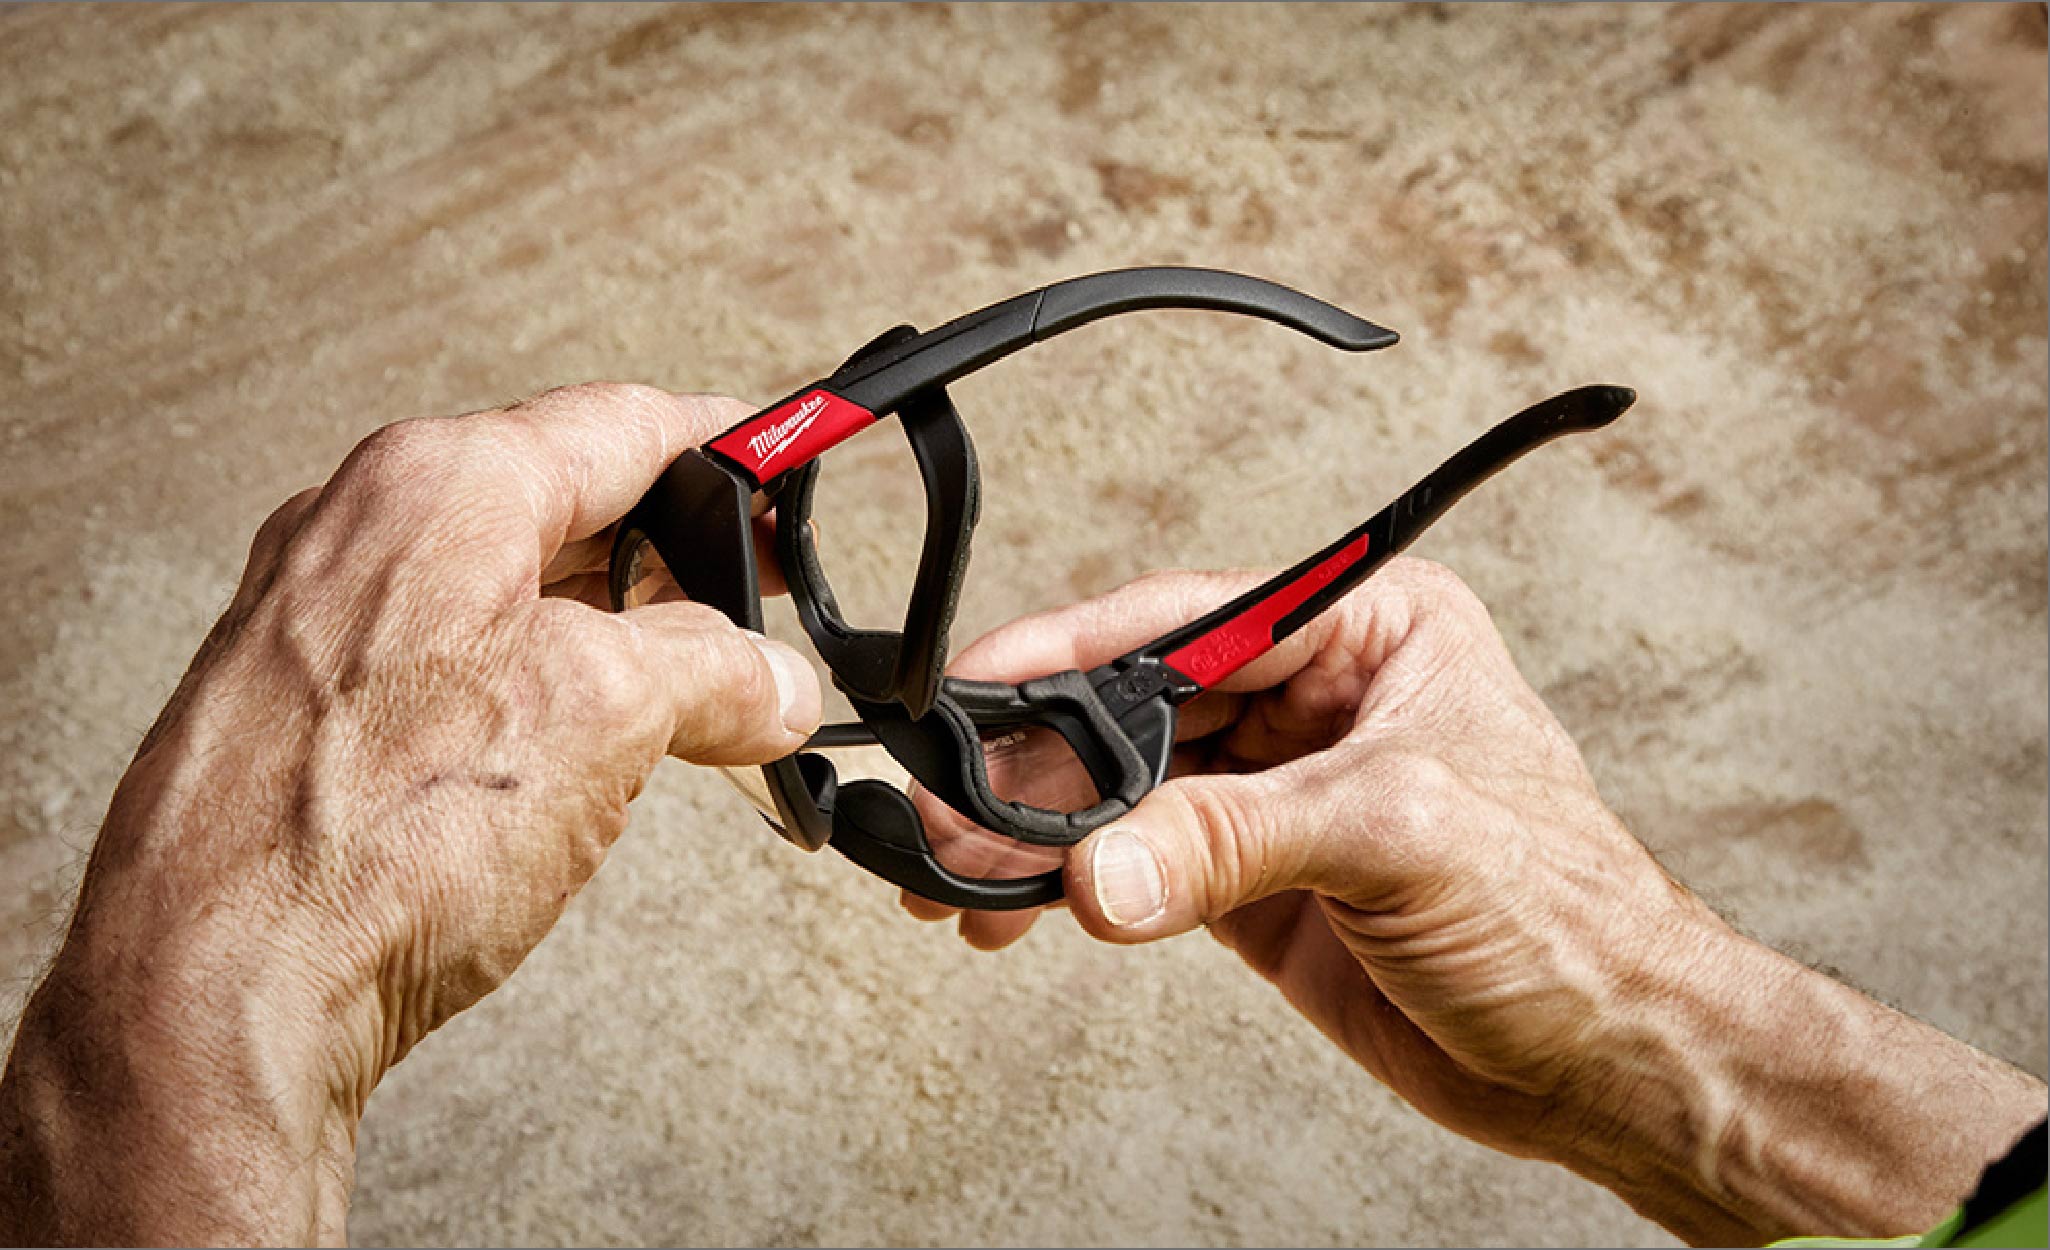 A pair of safety glasses have fog-free lenses.